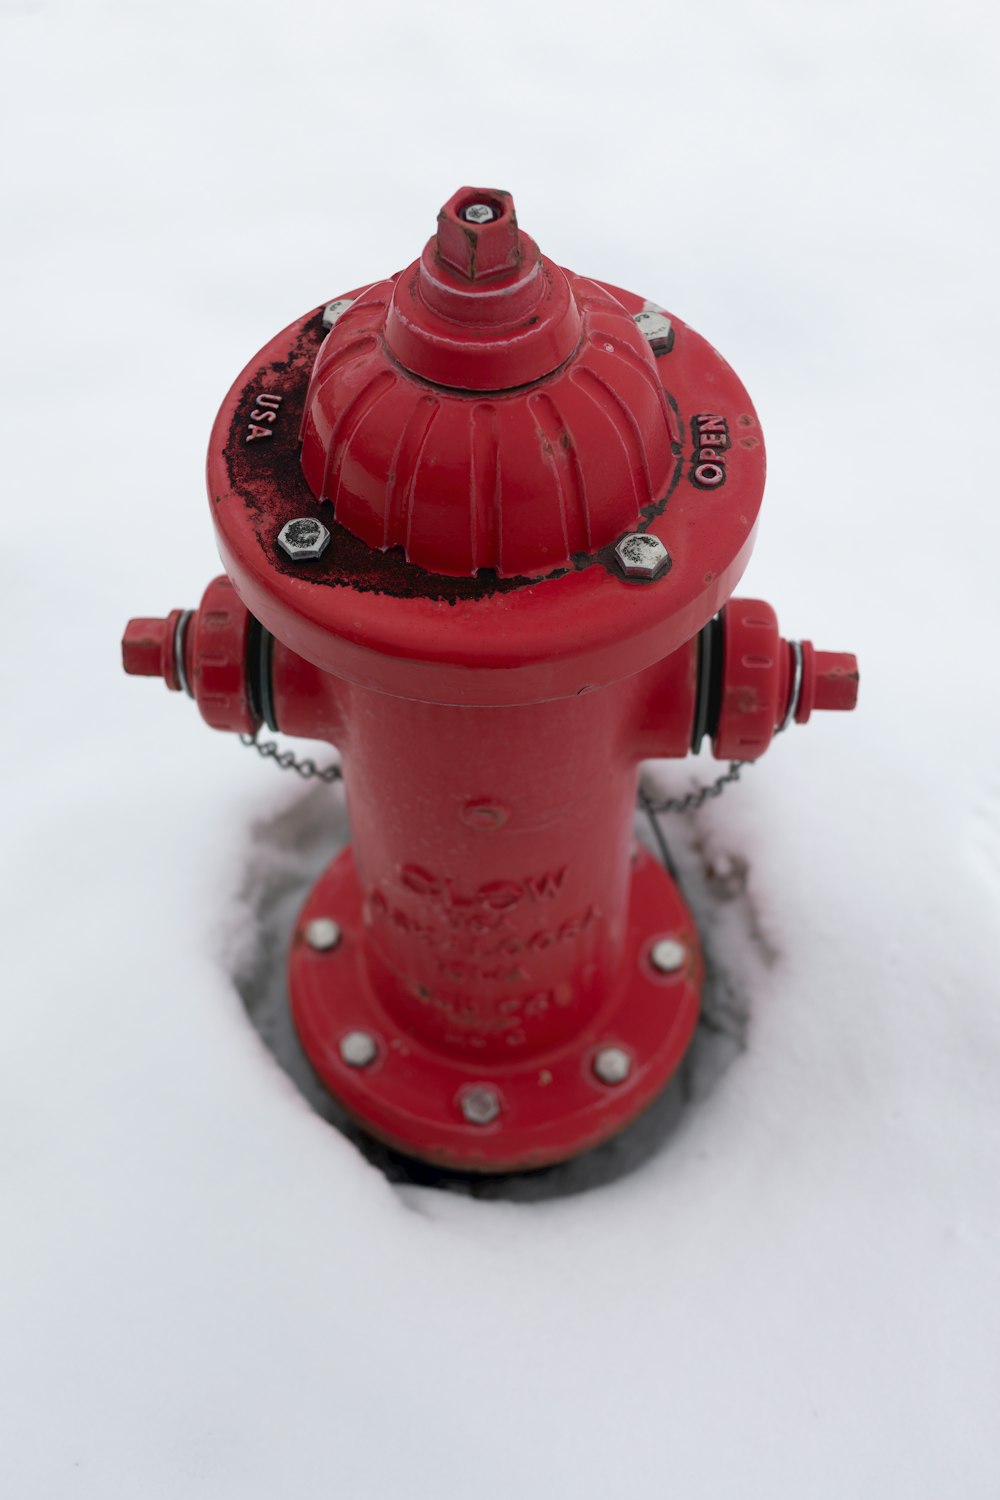 a red fire hydrant sitting in the snow